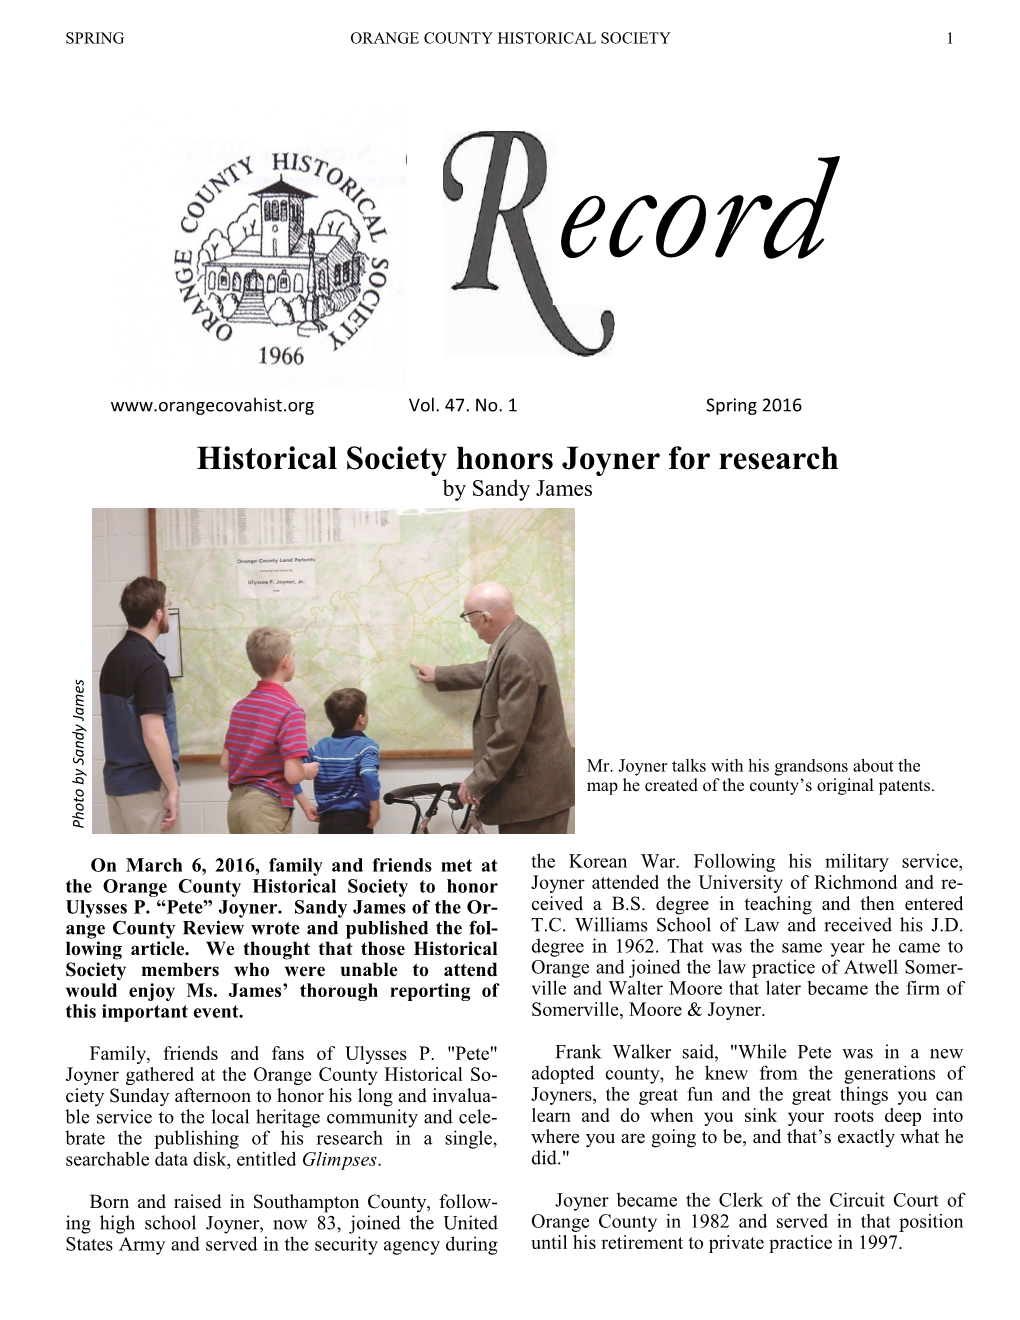 Historical Society Honors Joyner for Research